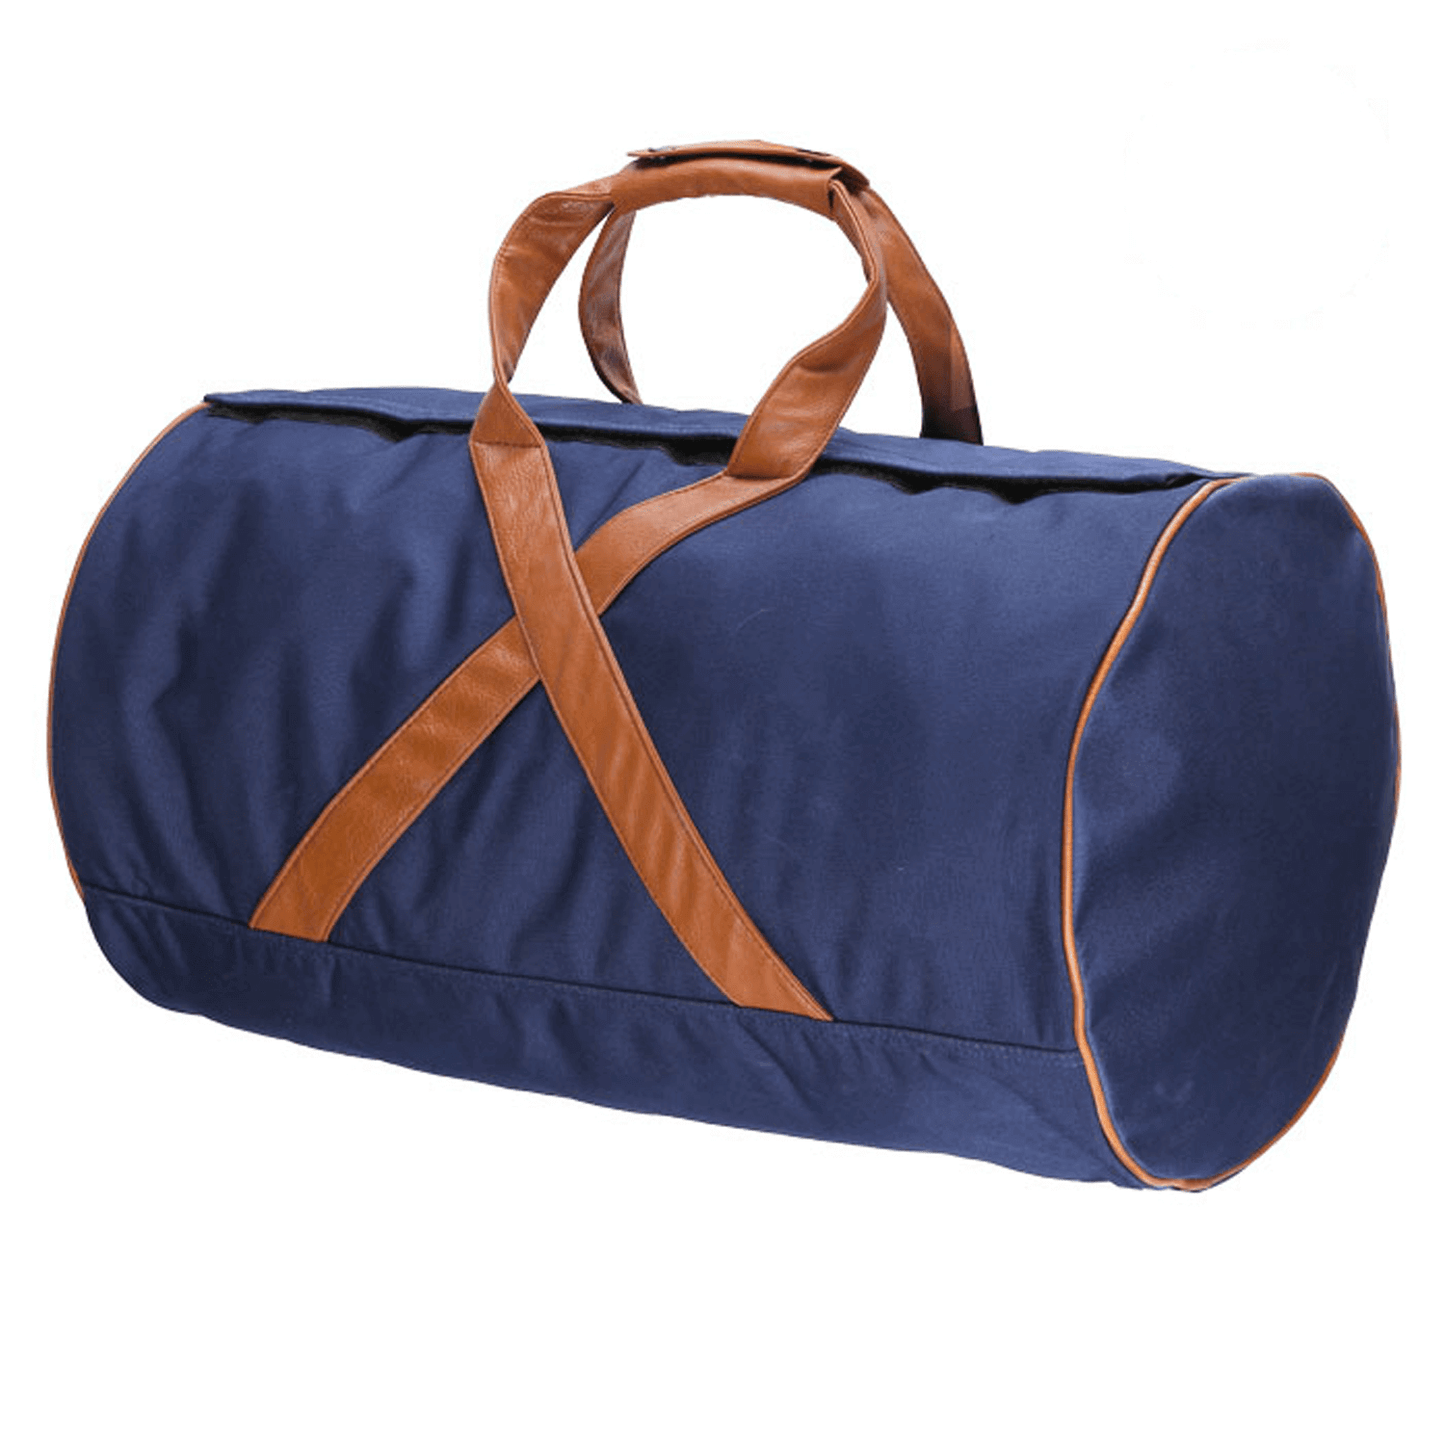 AWOL DAILY Large Blue Duffle Bag 886143 Harvest & Extraction 853336007867